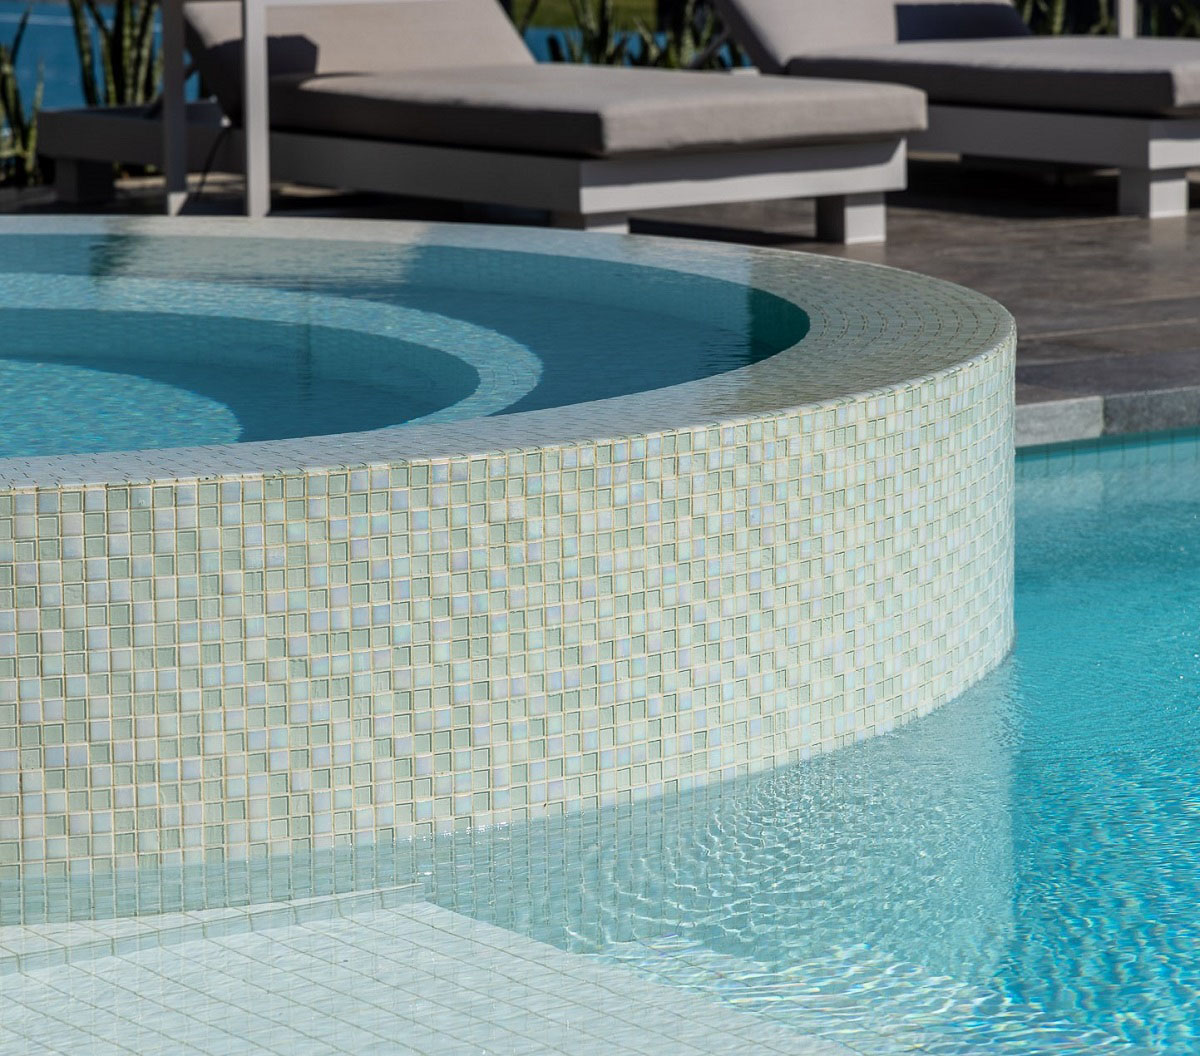 White CMC095 fully-tiled pool and White Crystal Pearl GCR305 spa exterior wall